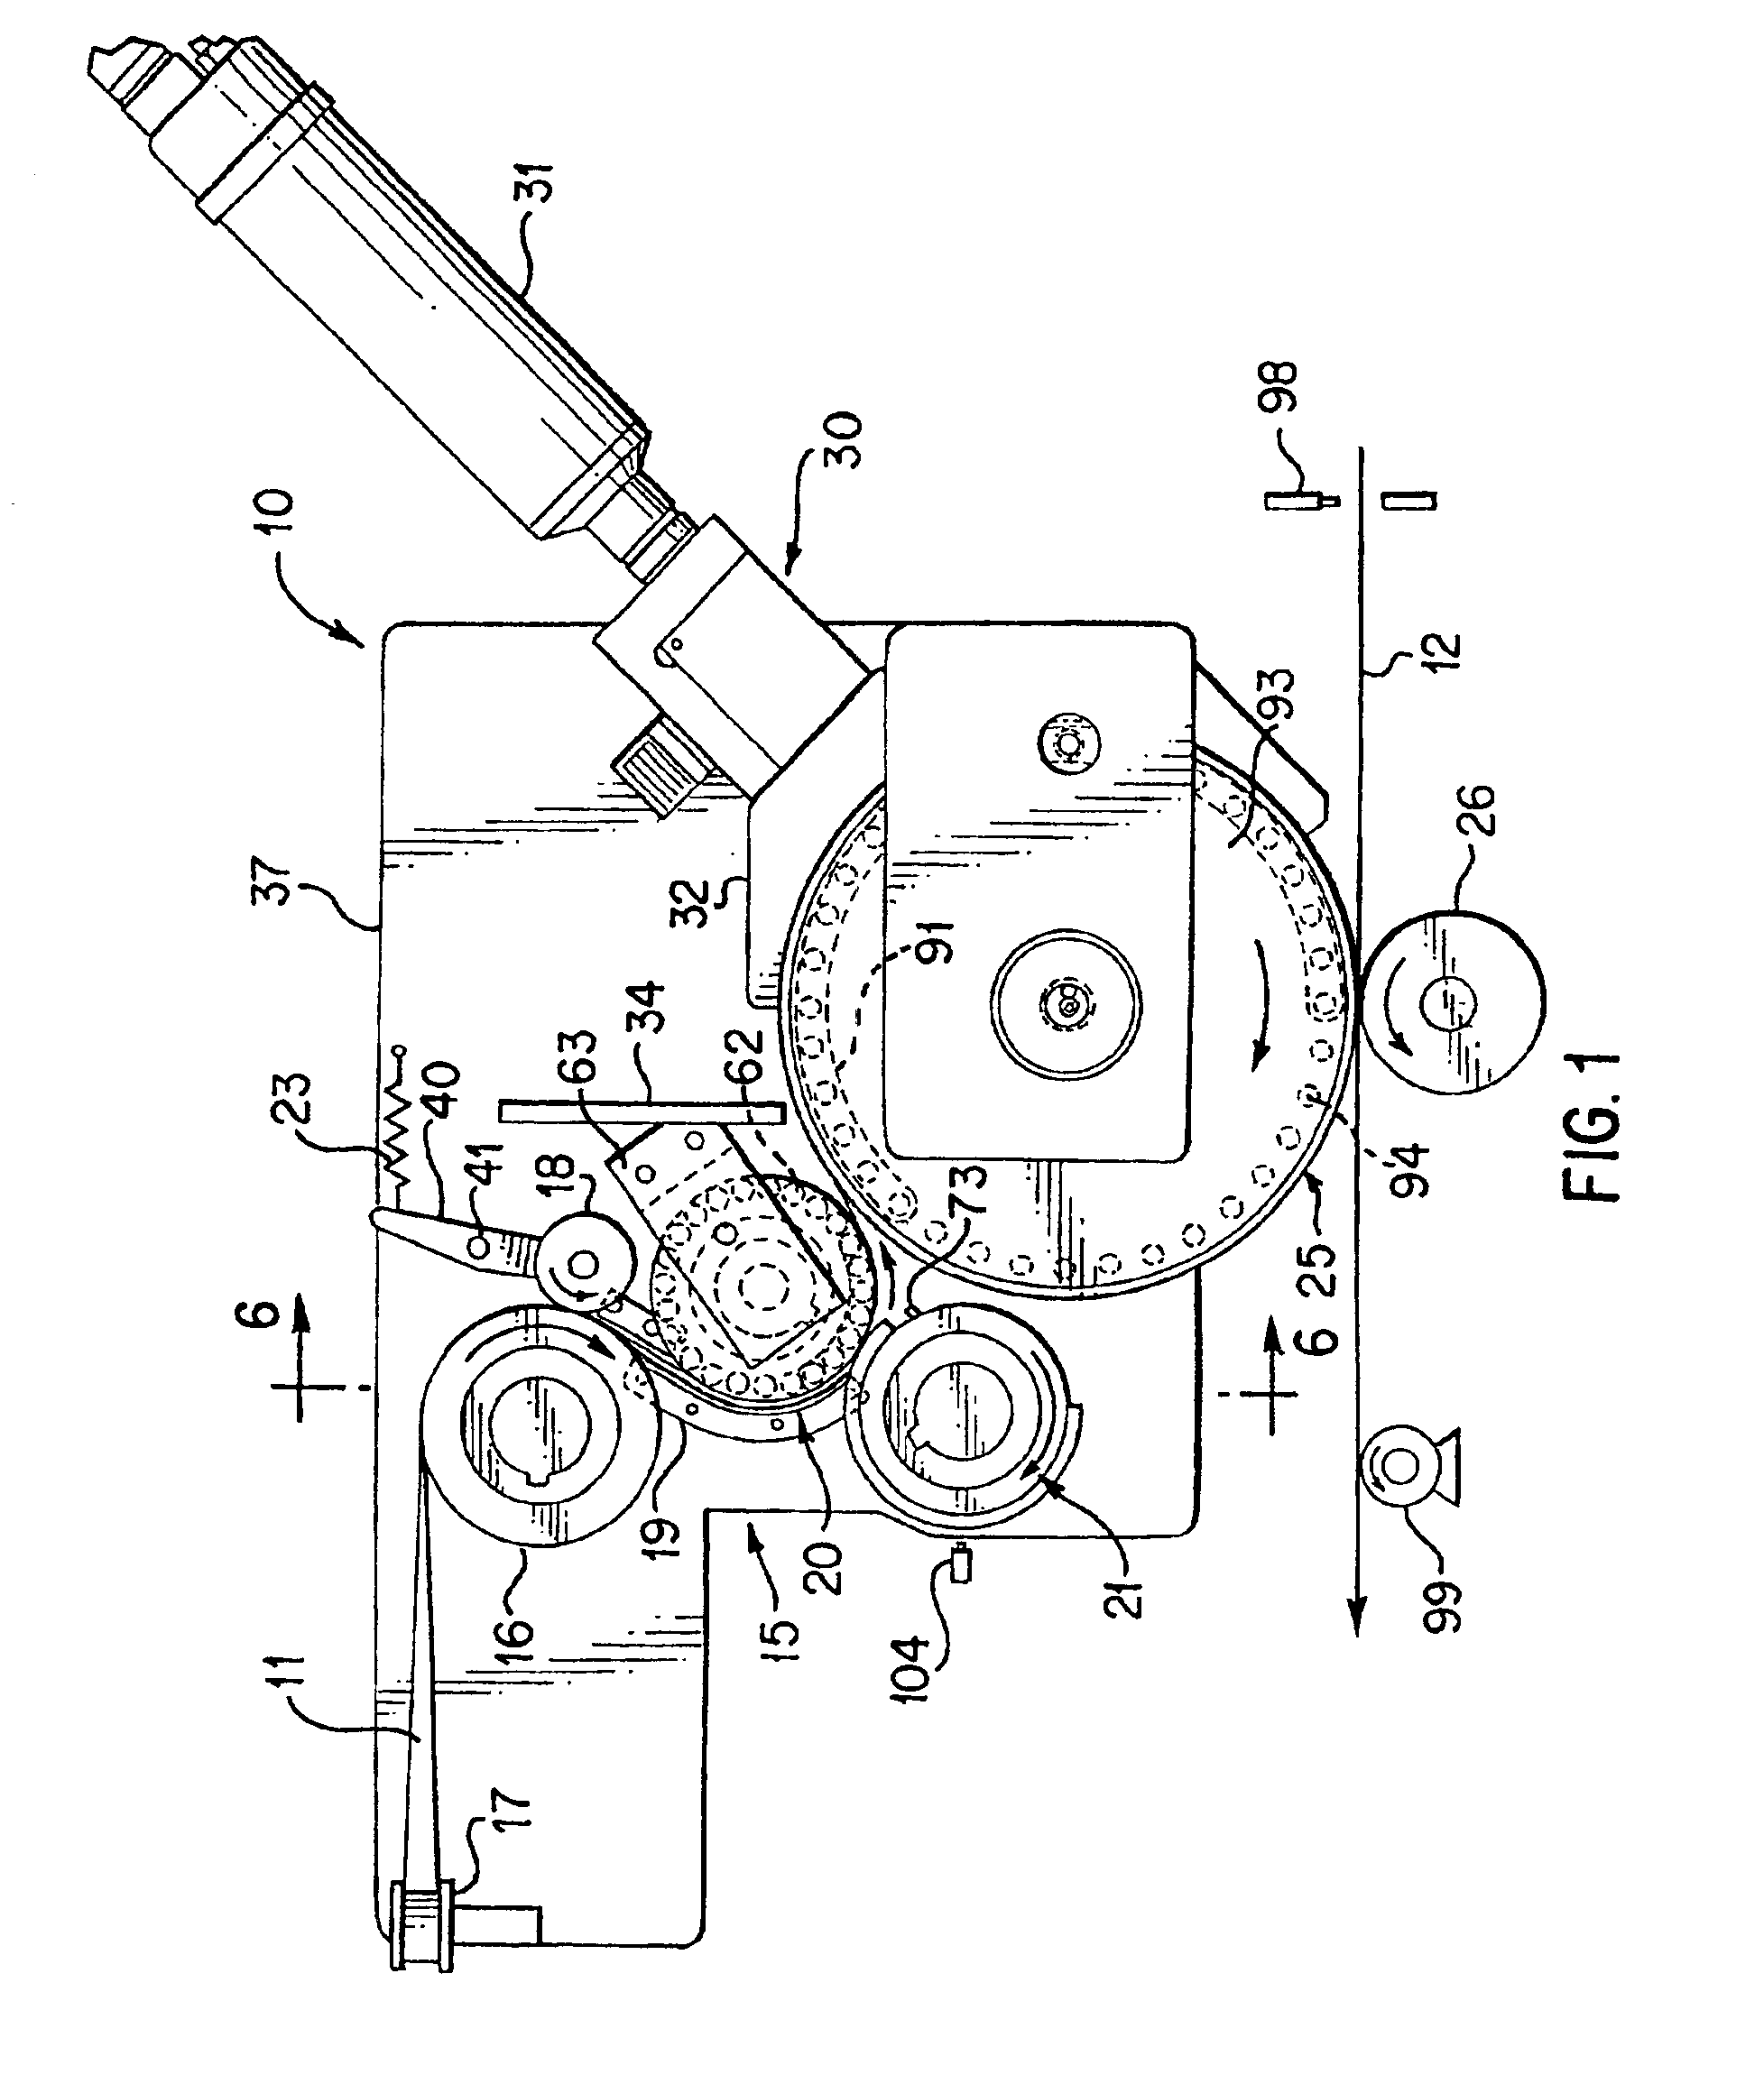 Web material advance system for web material applicator